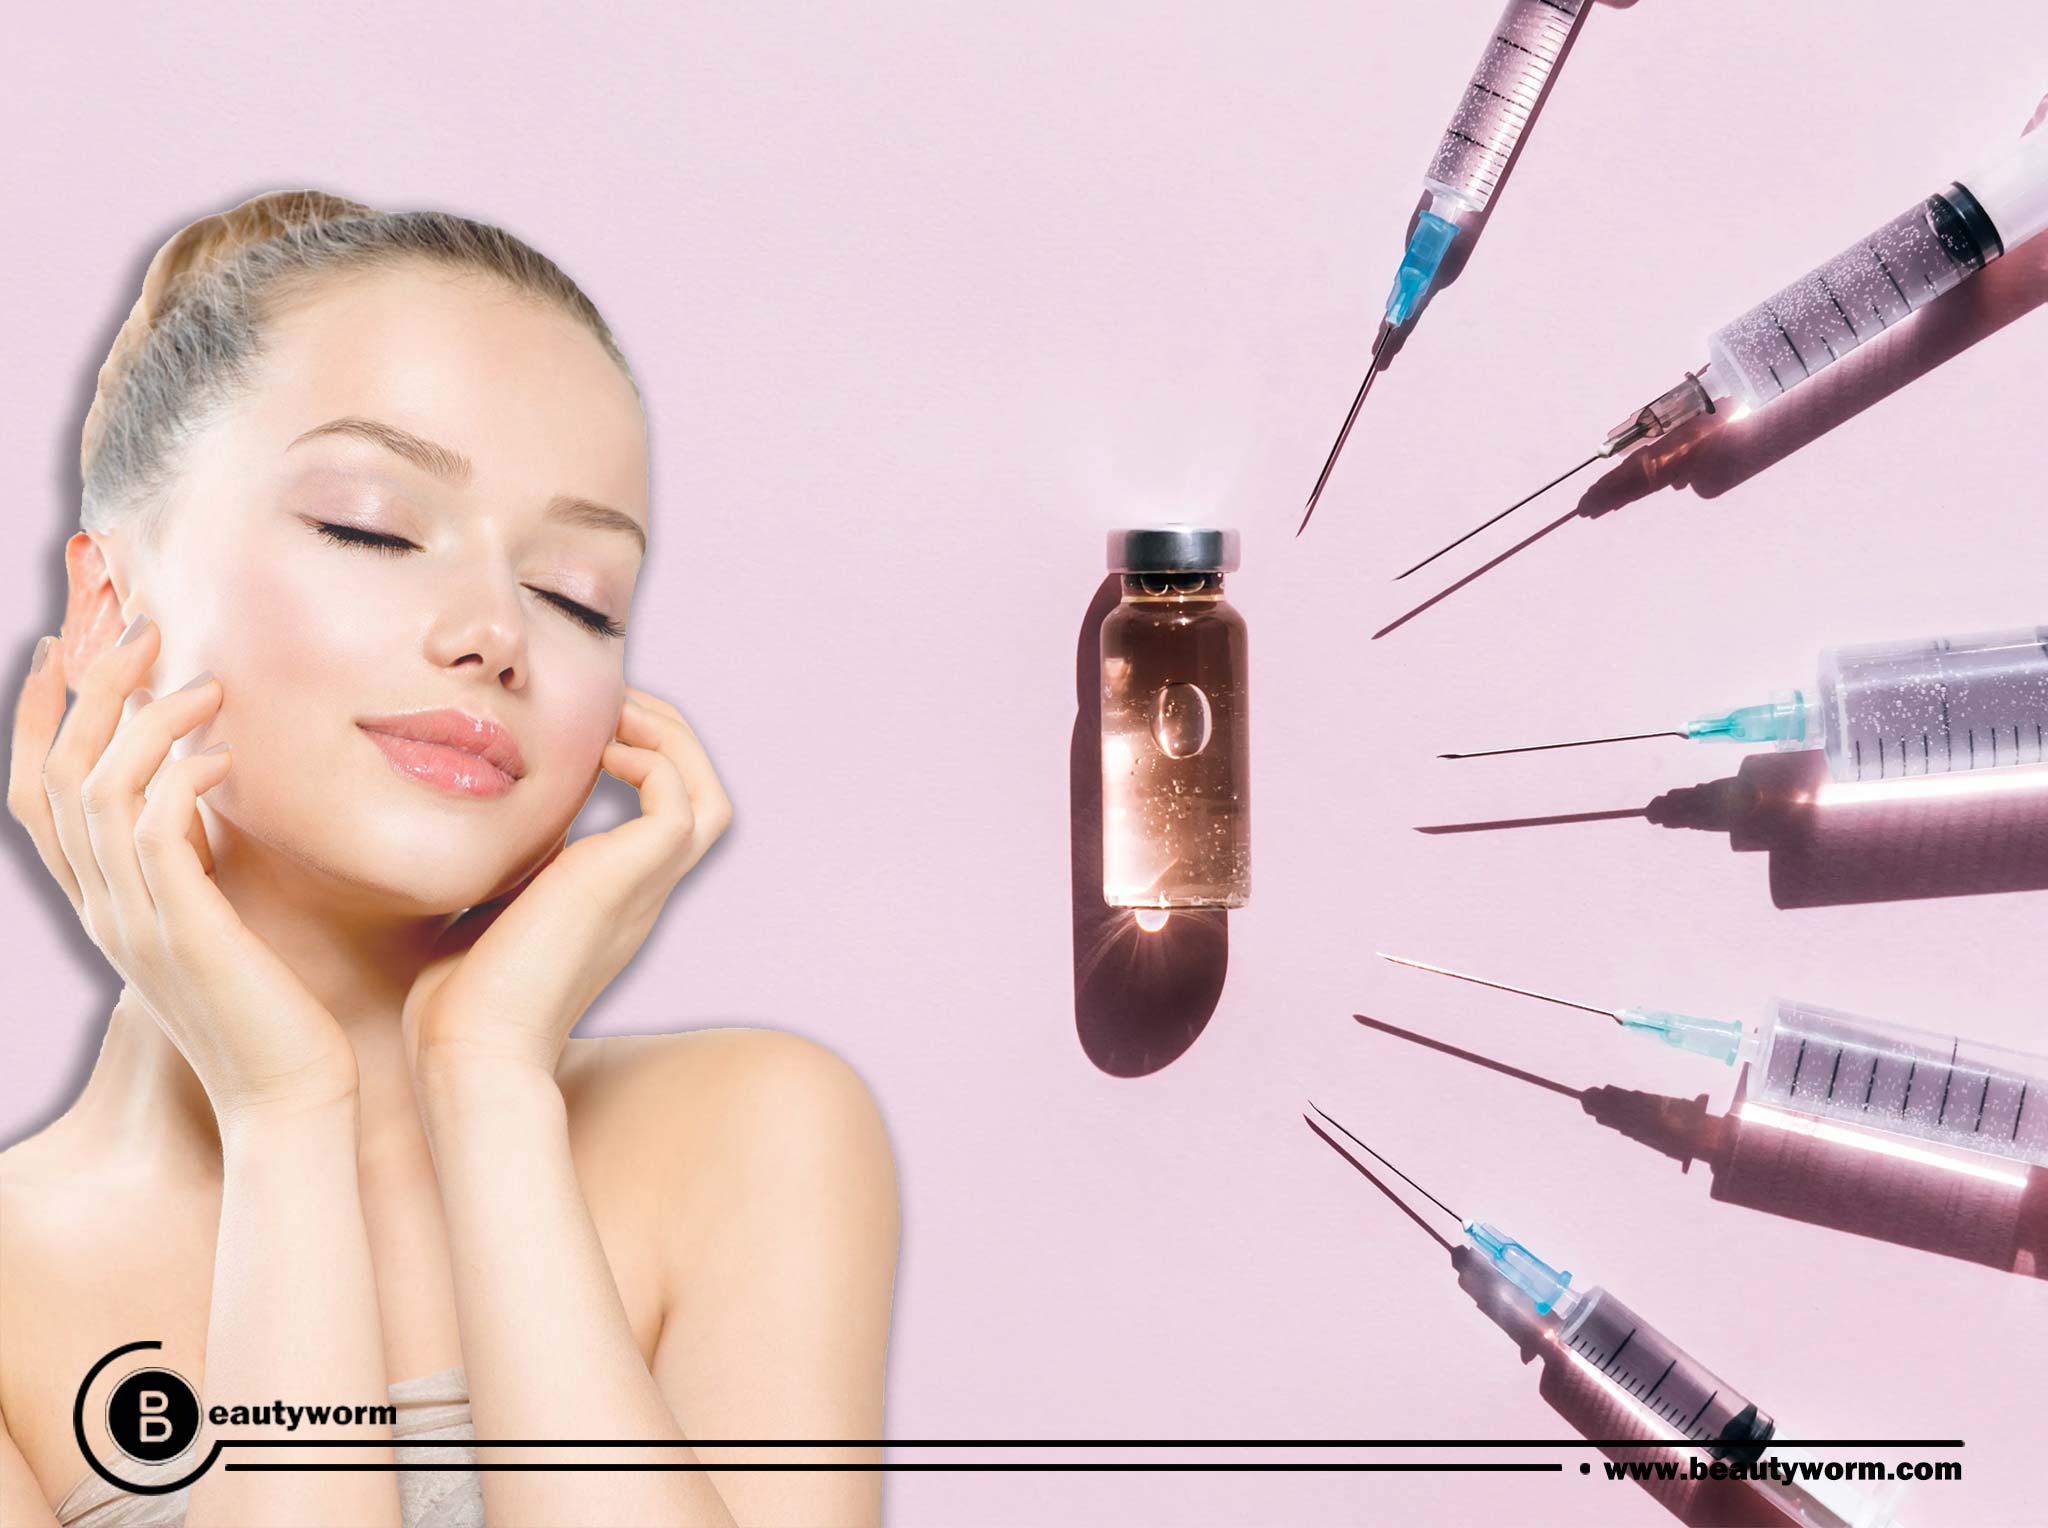 Things you should know about the Botox process